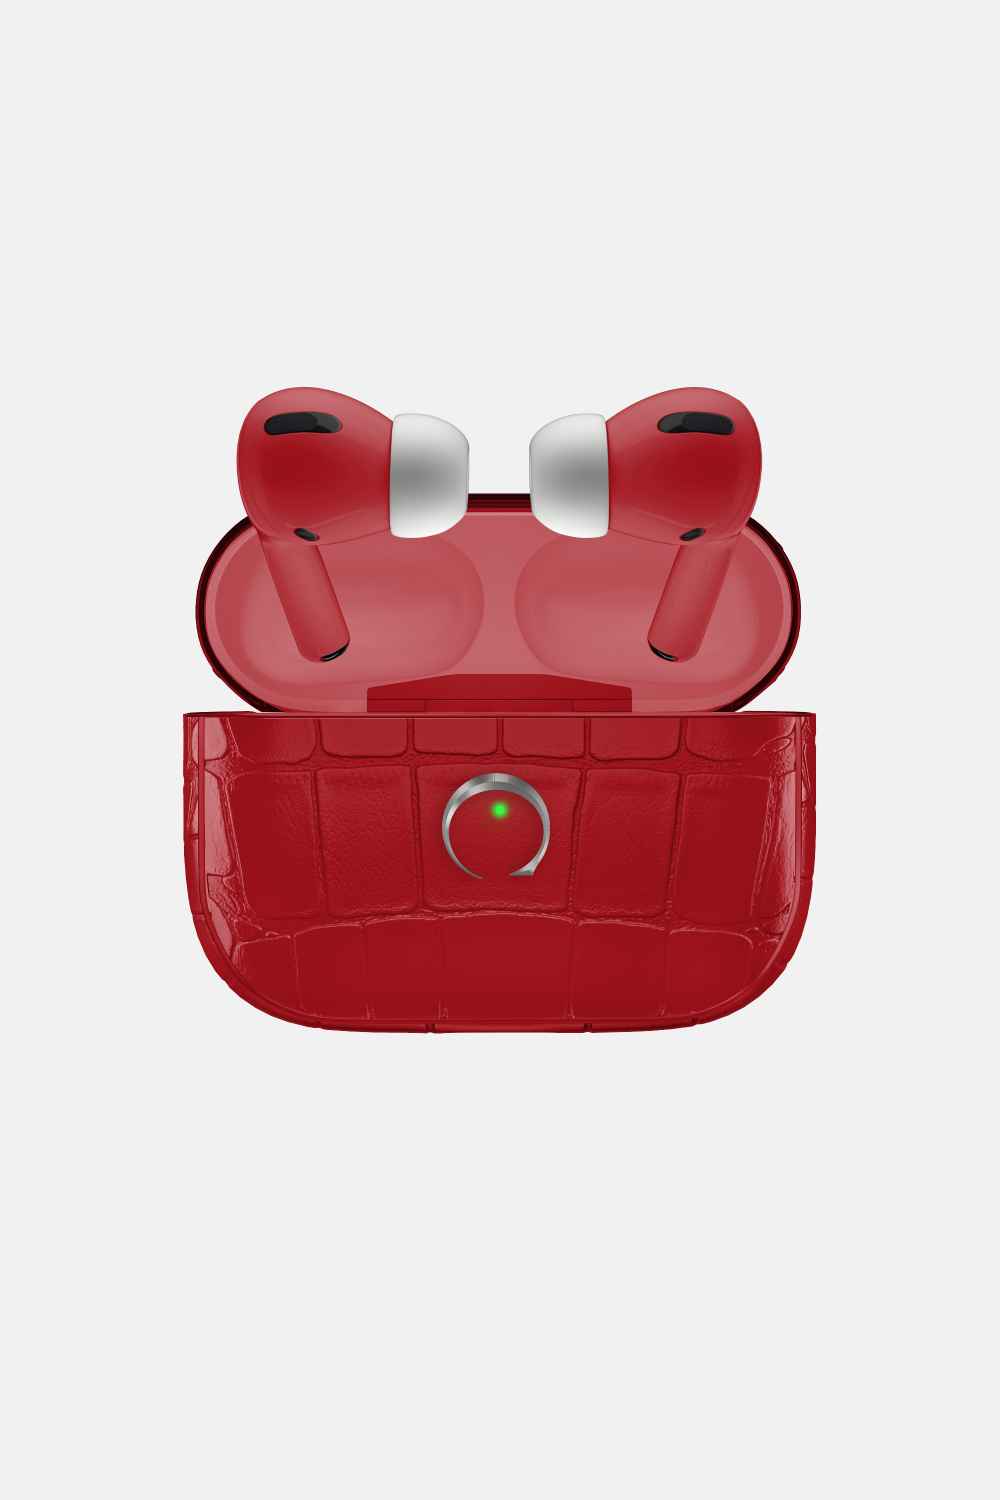 Alligator Airpods Pro 2nd Generation - Stainless Steel / Red - zollofrance